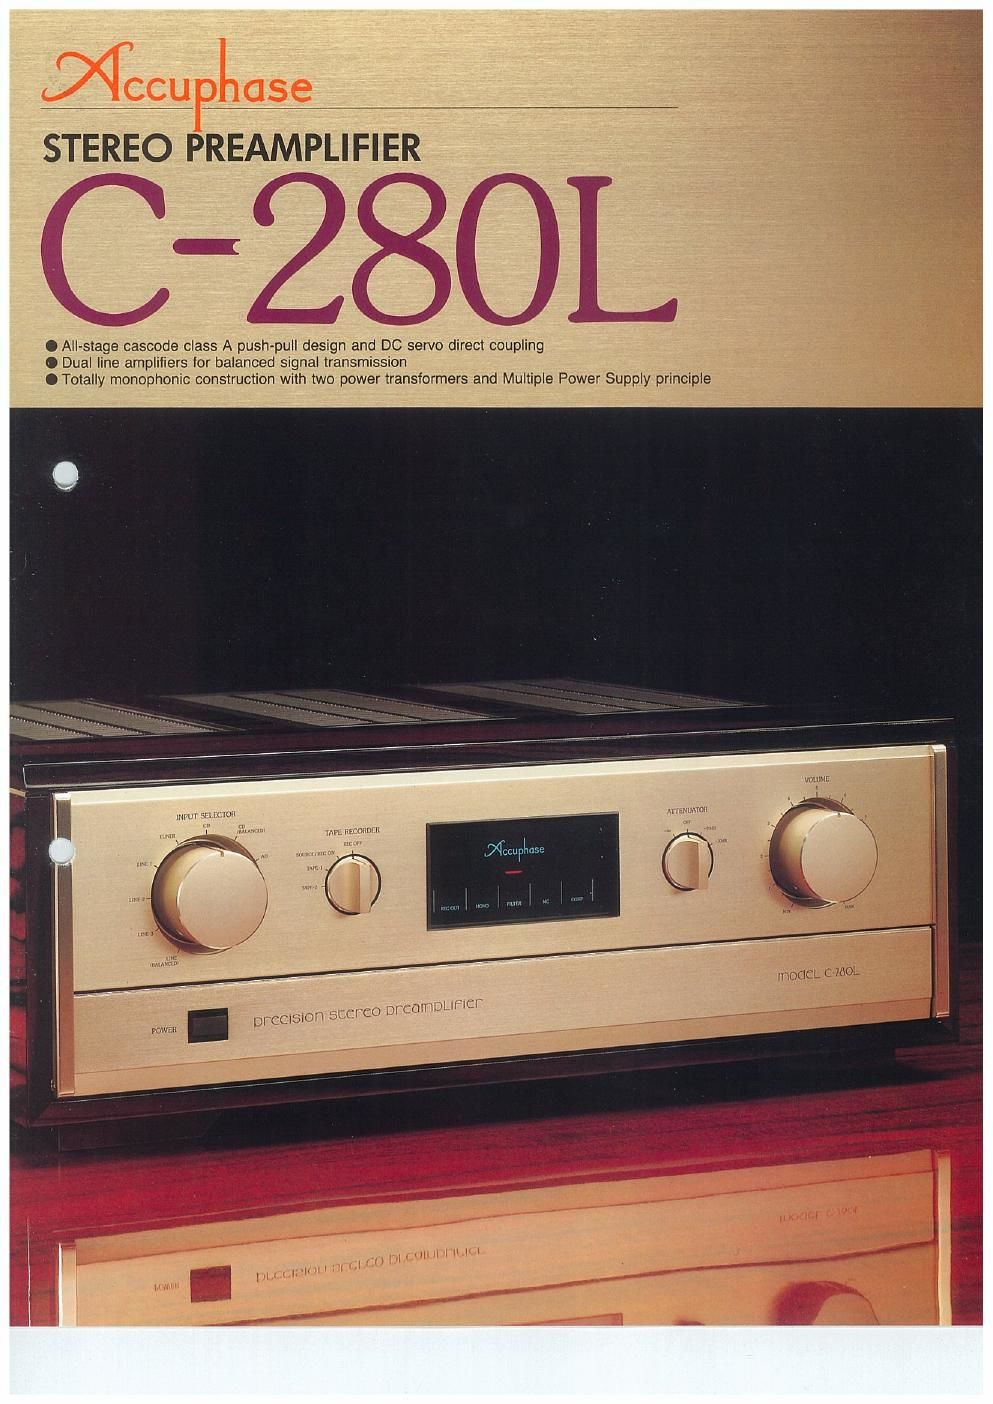 accuphase c 280 l brochure